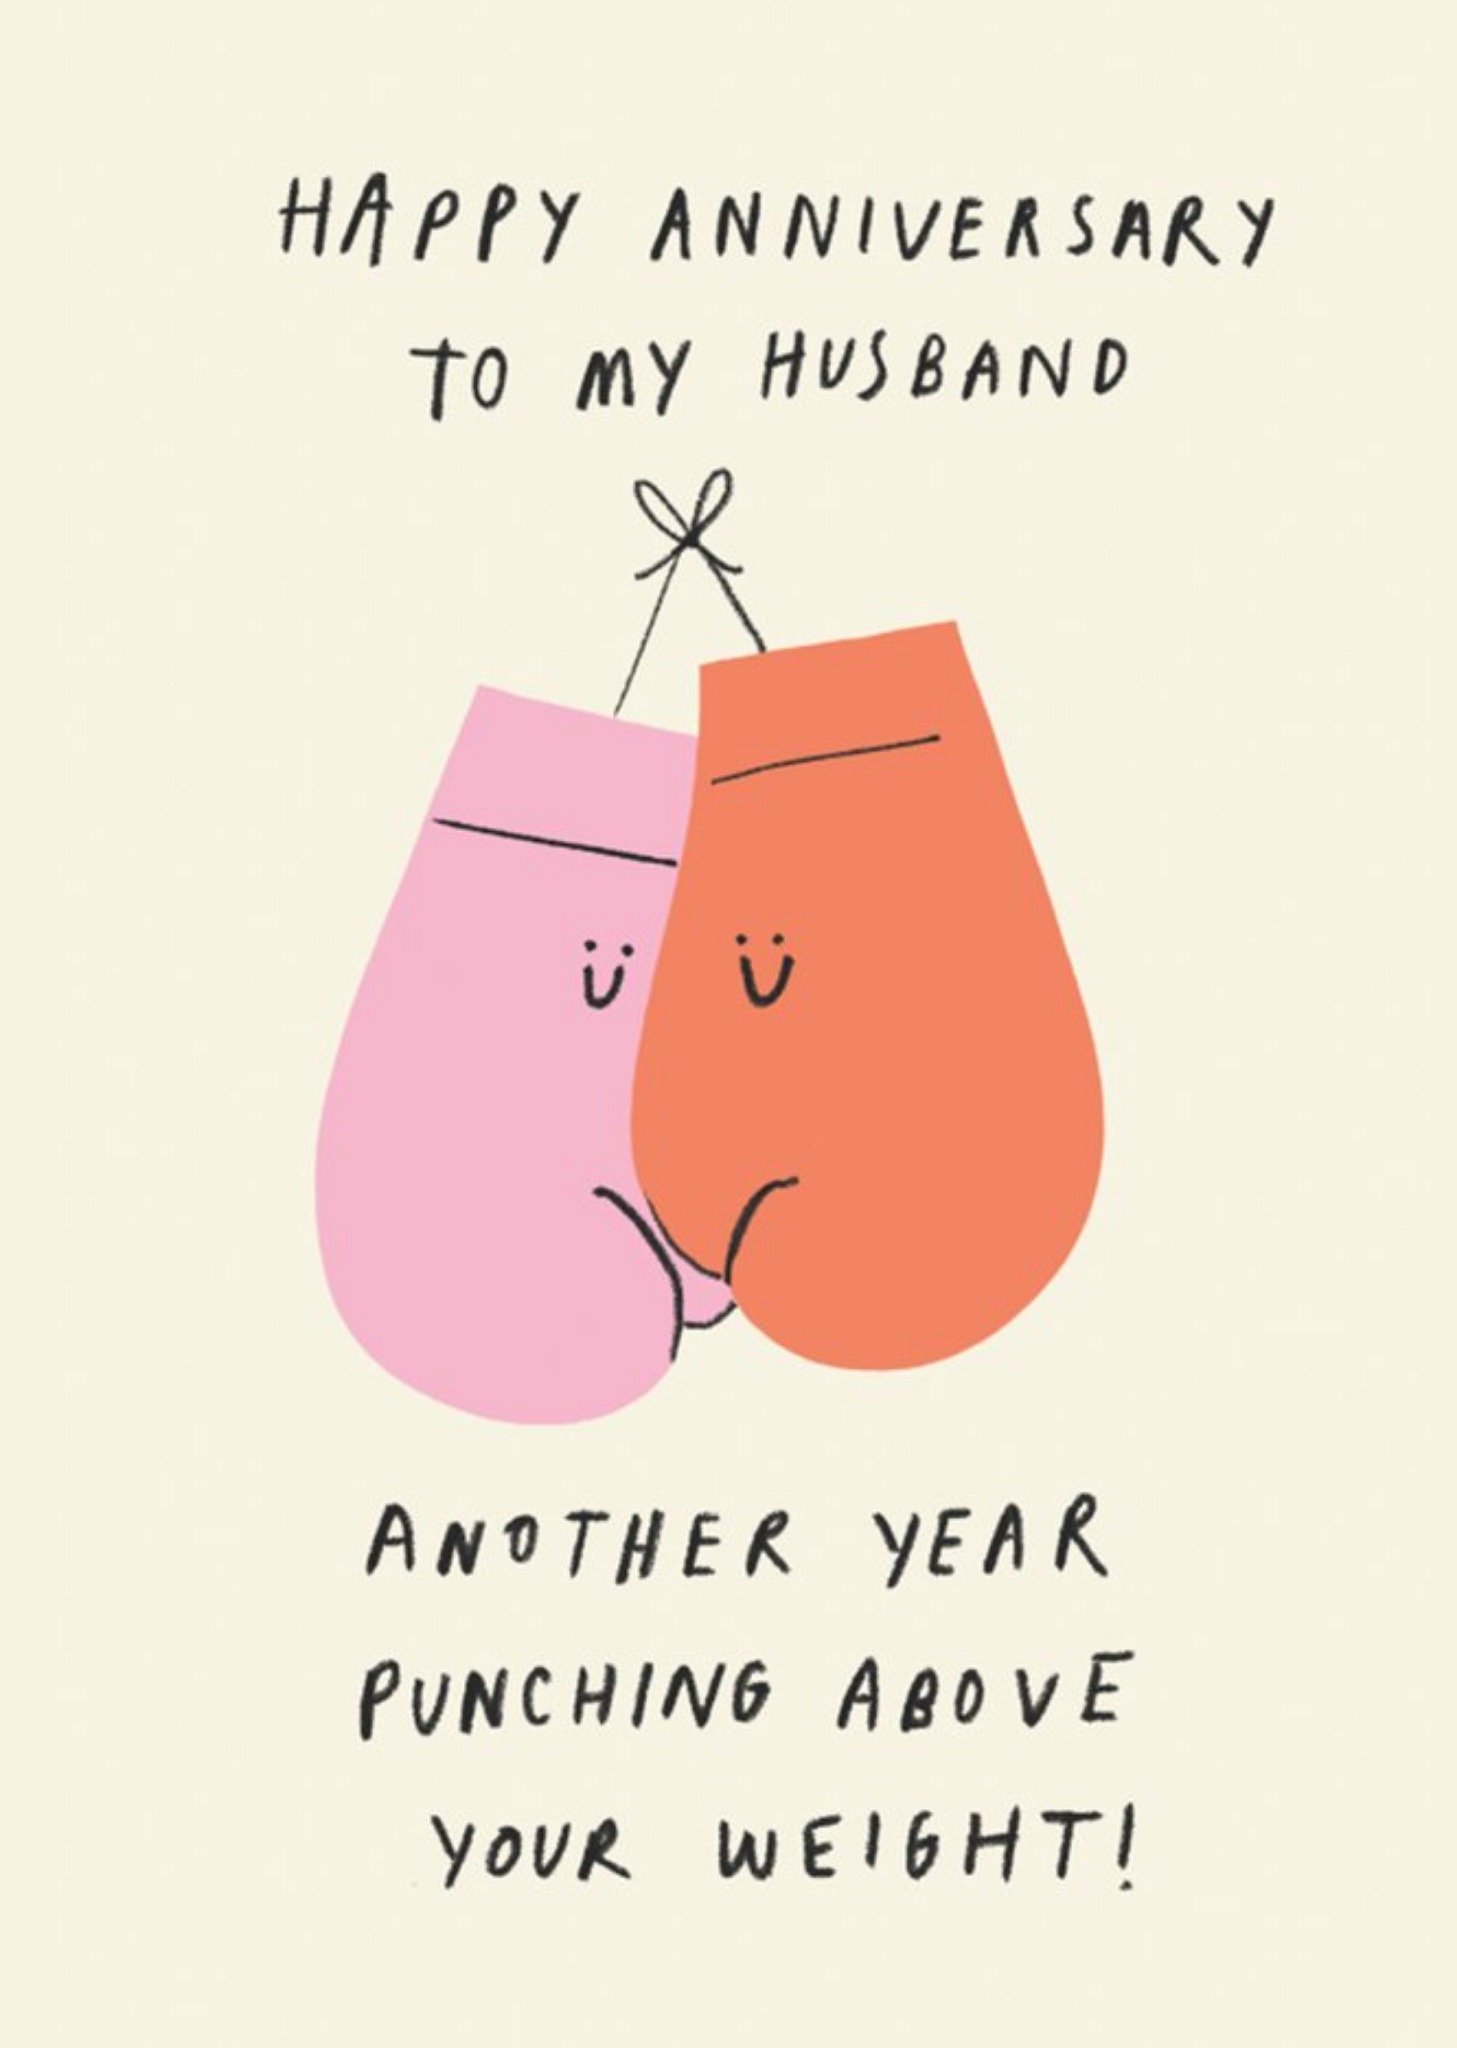 Moonpig Ukg Broxing Gloves Sweet Cute Funny Anniversary Card, Large